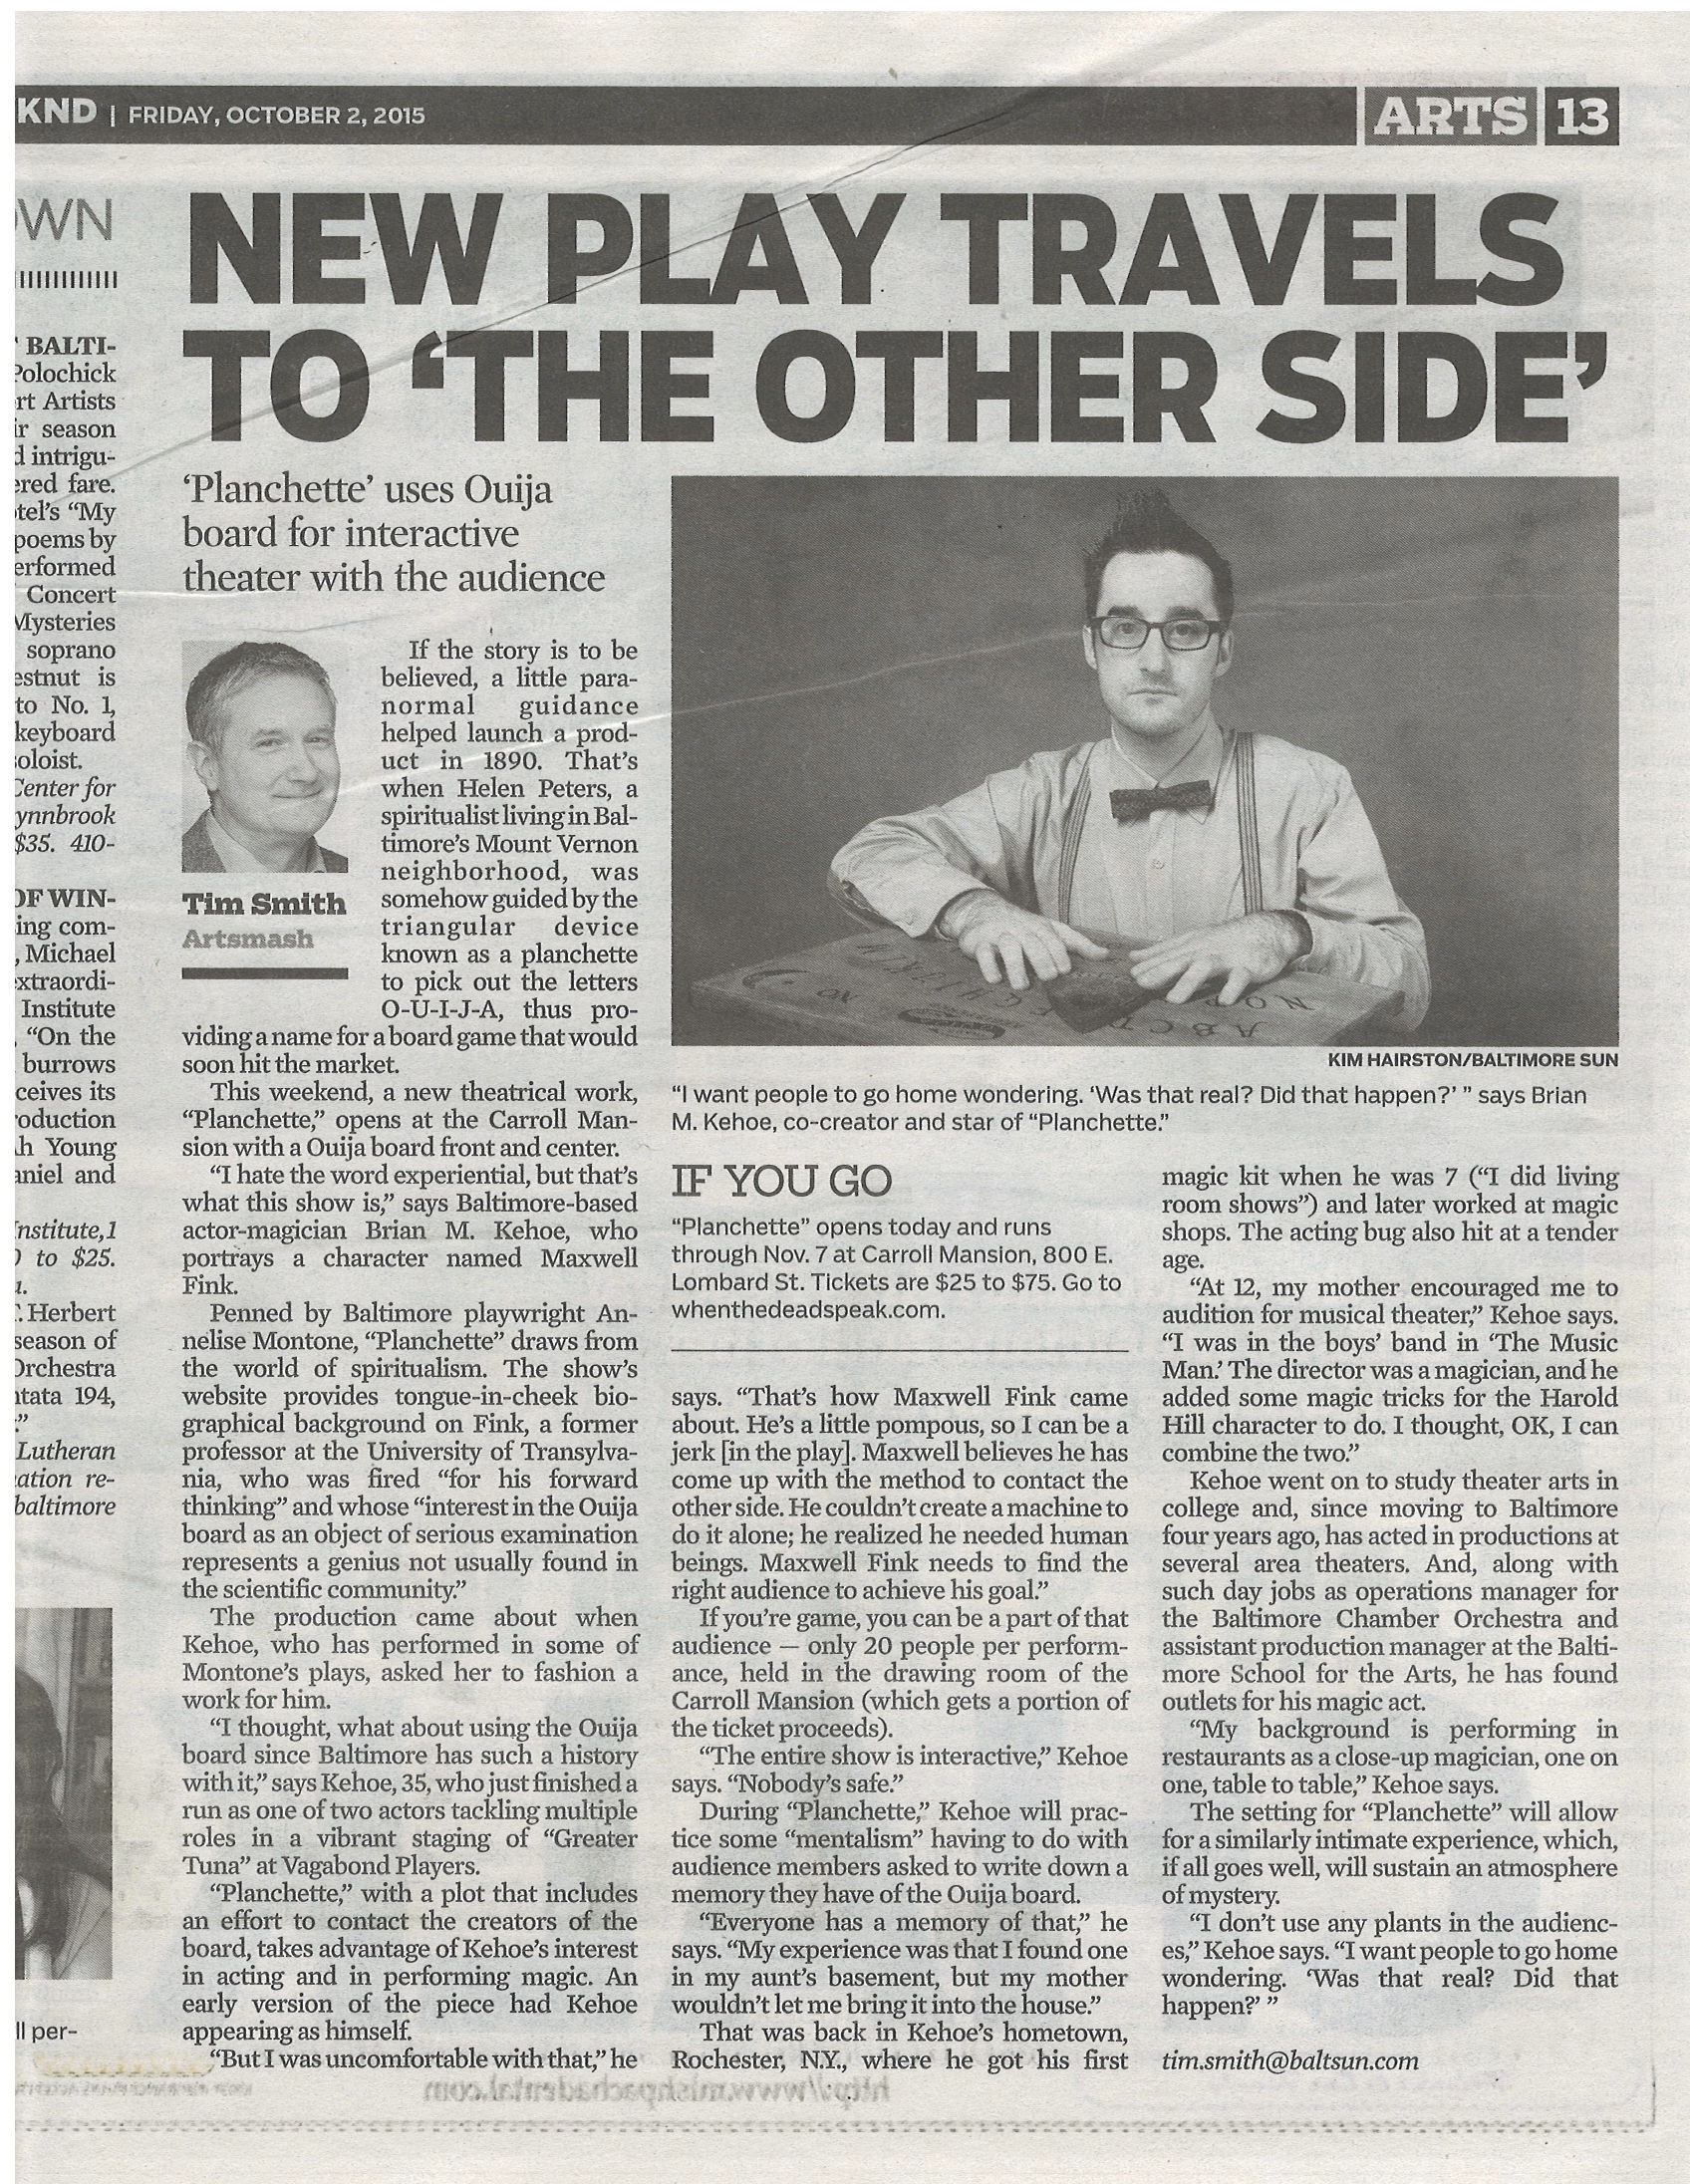 Pre-Show press titled "New Play Travels to the Other Side" about the show Planchette in The Baltimore Sun.